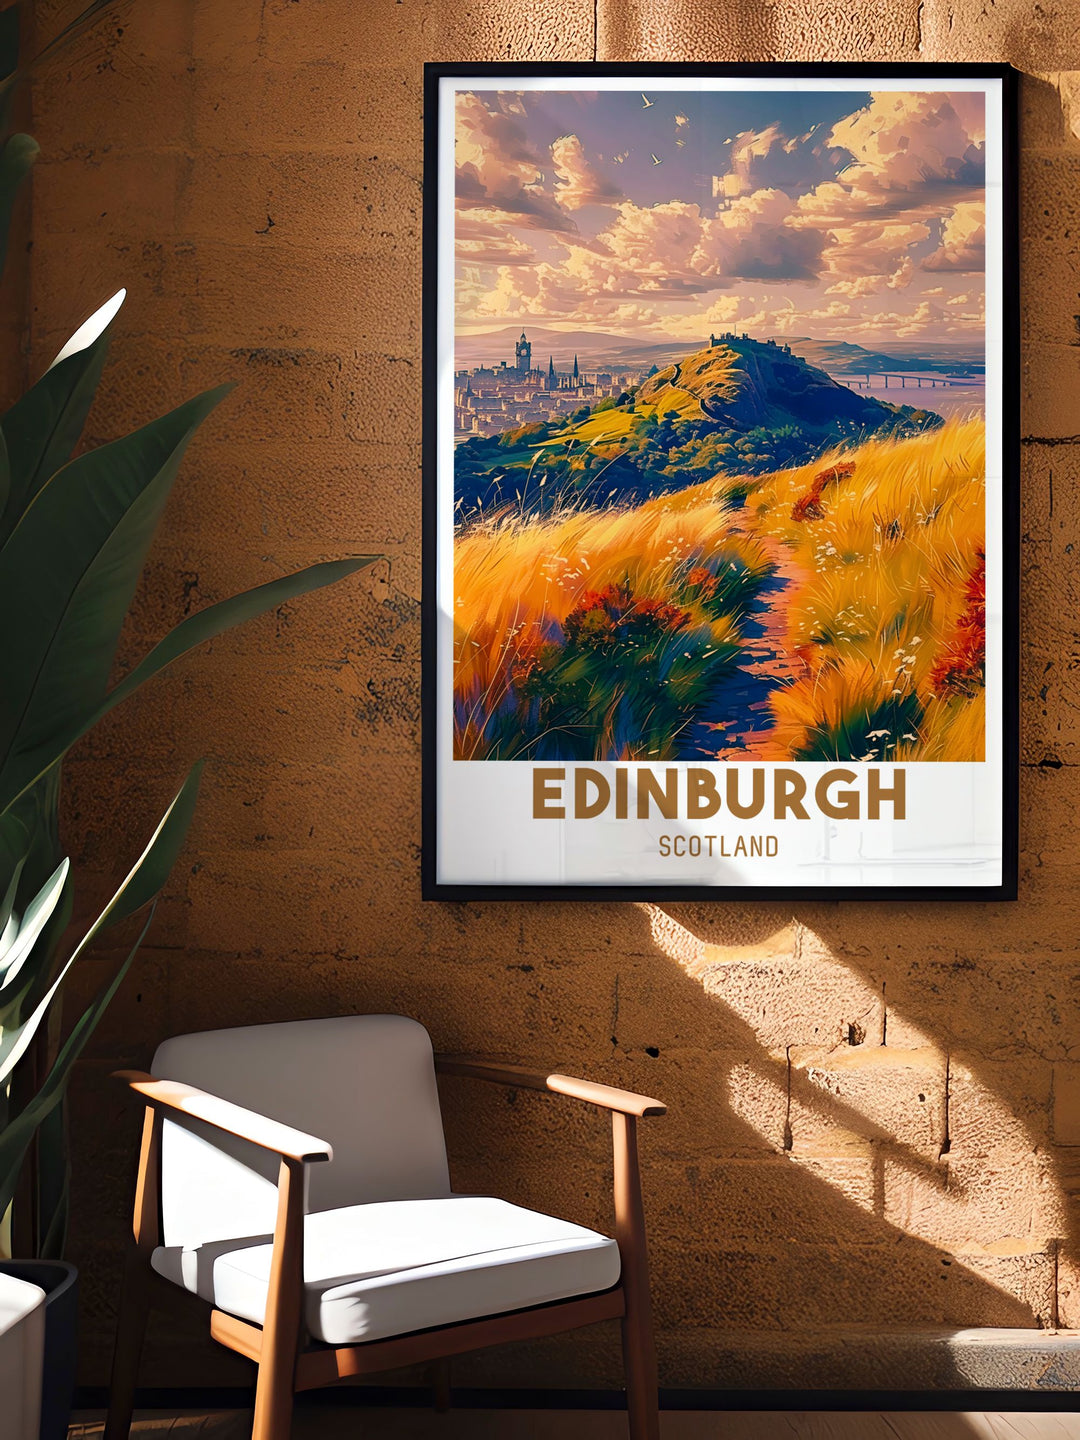 Framed art capturing the majestic view from Arthurs Seat, emphasizing the natural splendor and historic essence of Edinburgh.